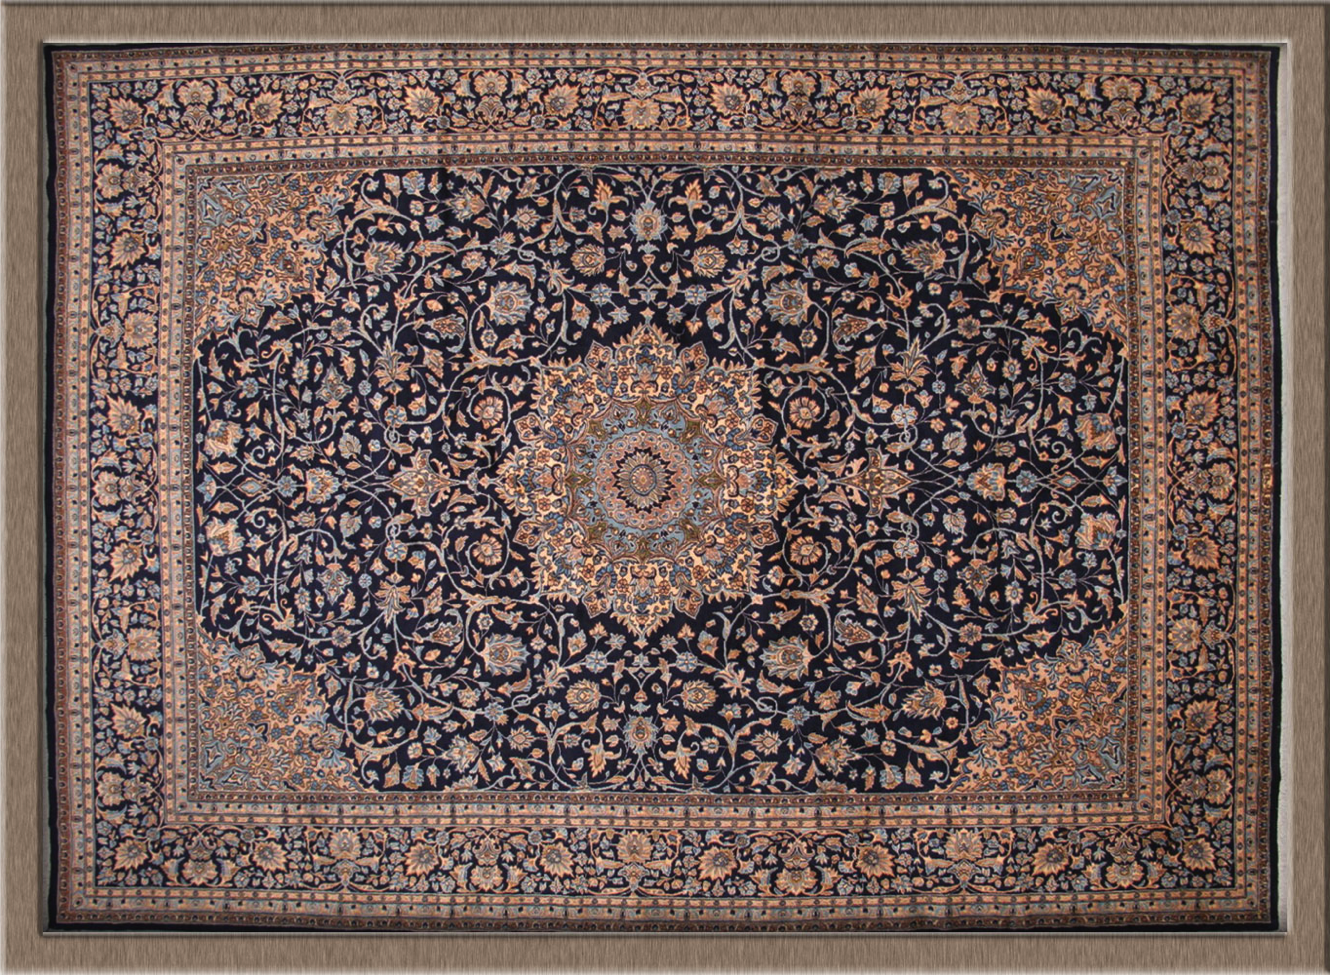  Kerman has been a major center for the production of high quality carpets since at least the 15th century. In the 18th century, some authors considered the carpets from the province of Kerman, especially at Siftan, to be the finest of all Persian ca